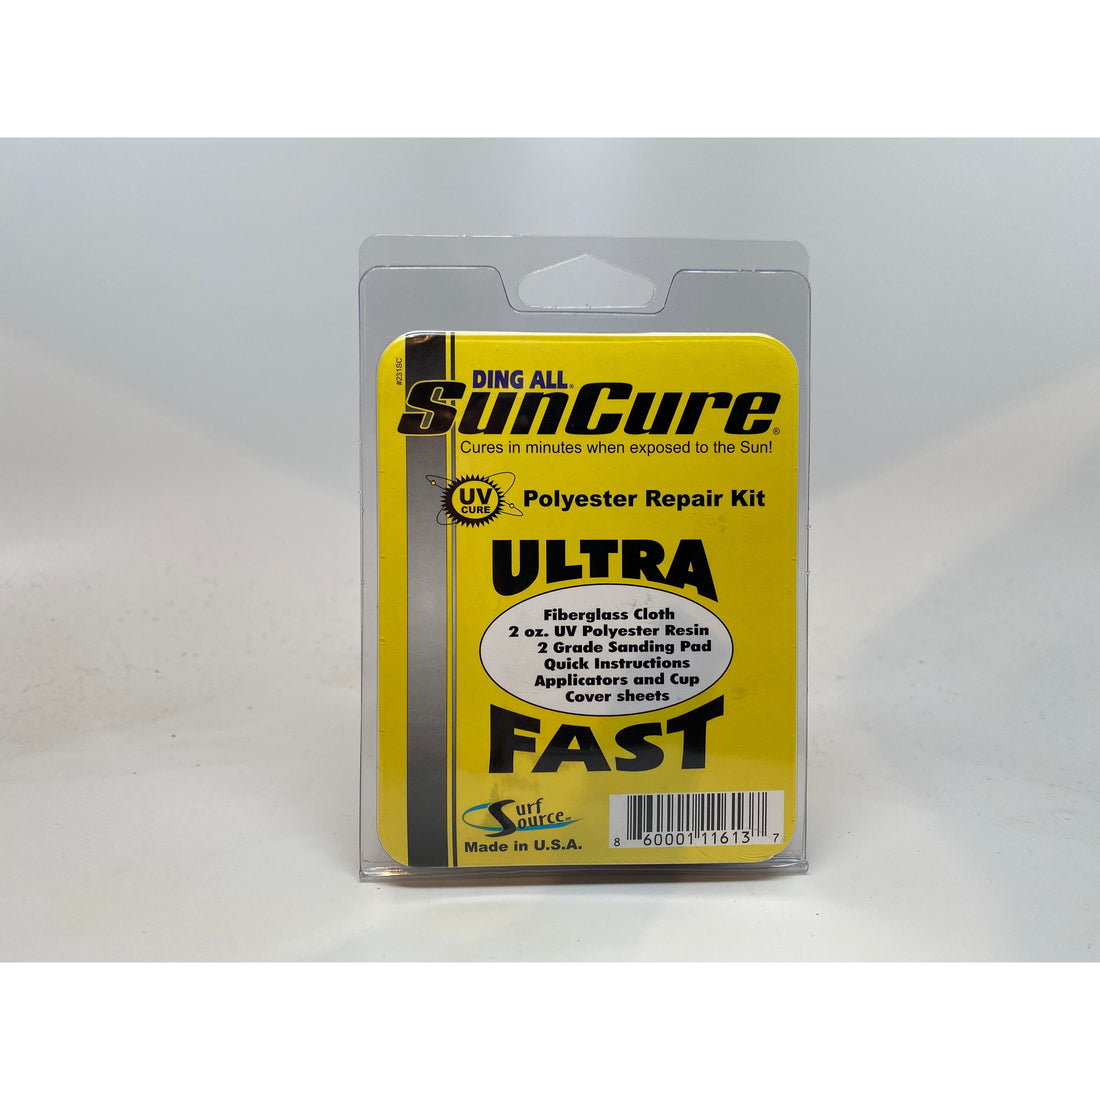 Ding All Sun Cure 2oz Polyester Repair Kit - Seaside Surf Shop 